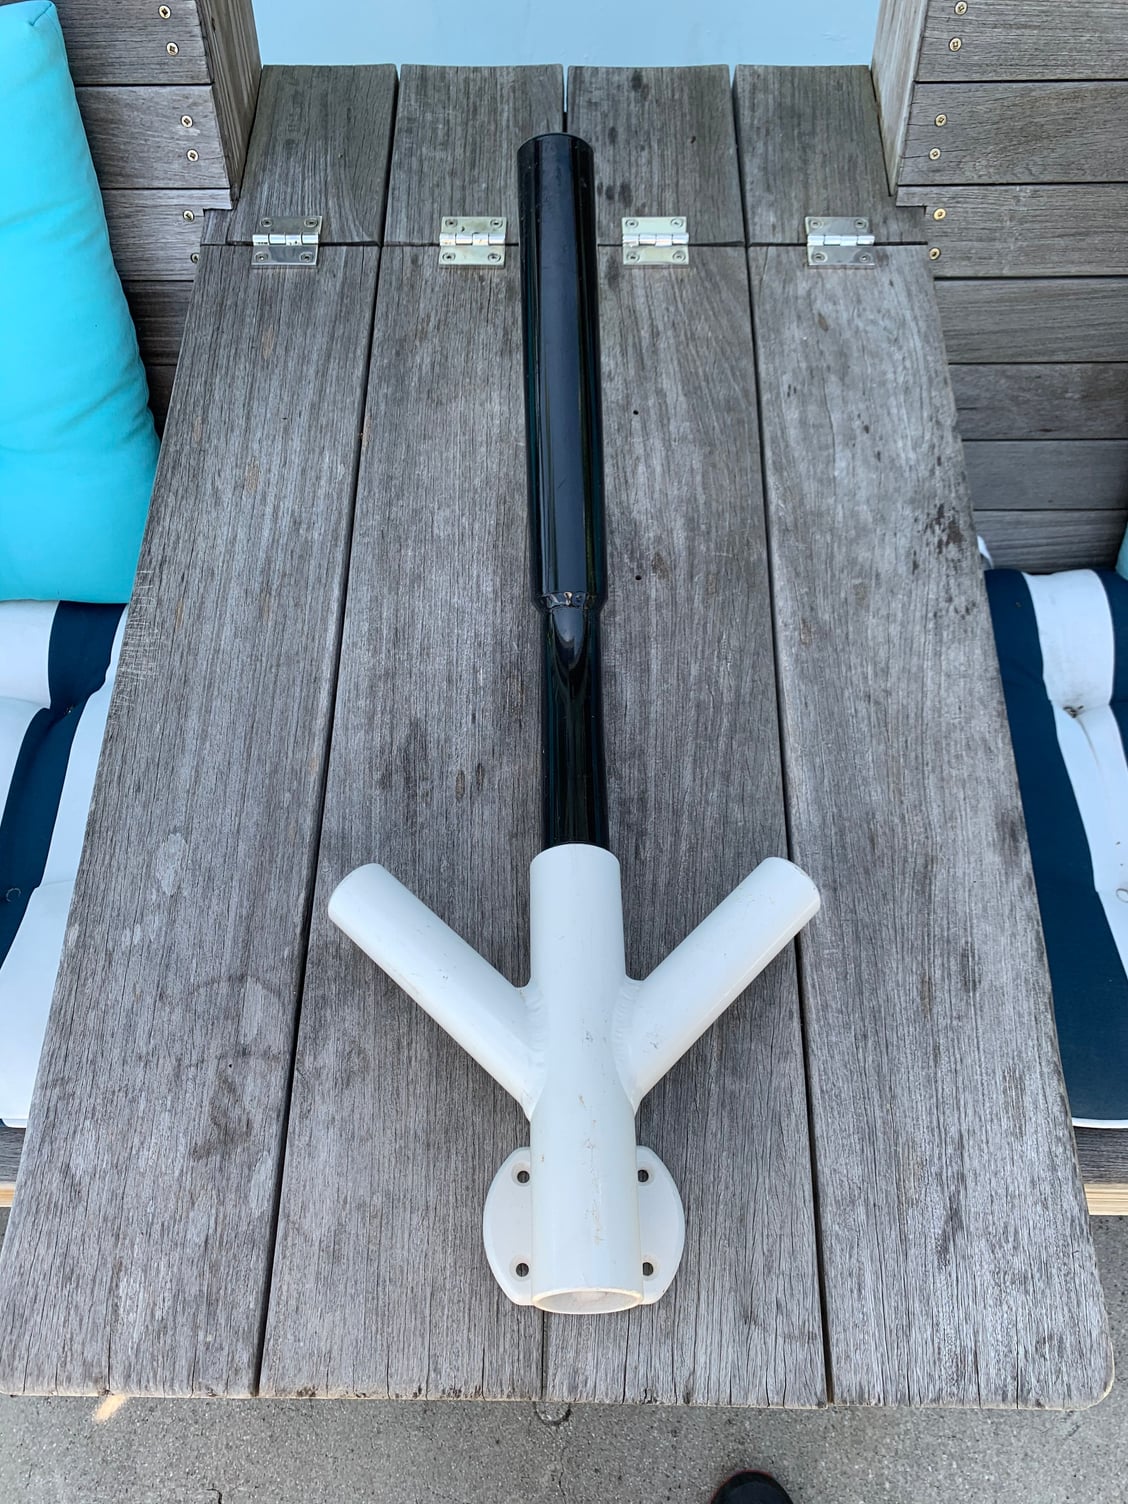 Home Made Rod Holder - The Hull Truth - Boating and Fishing Forum